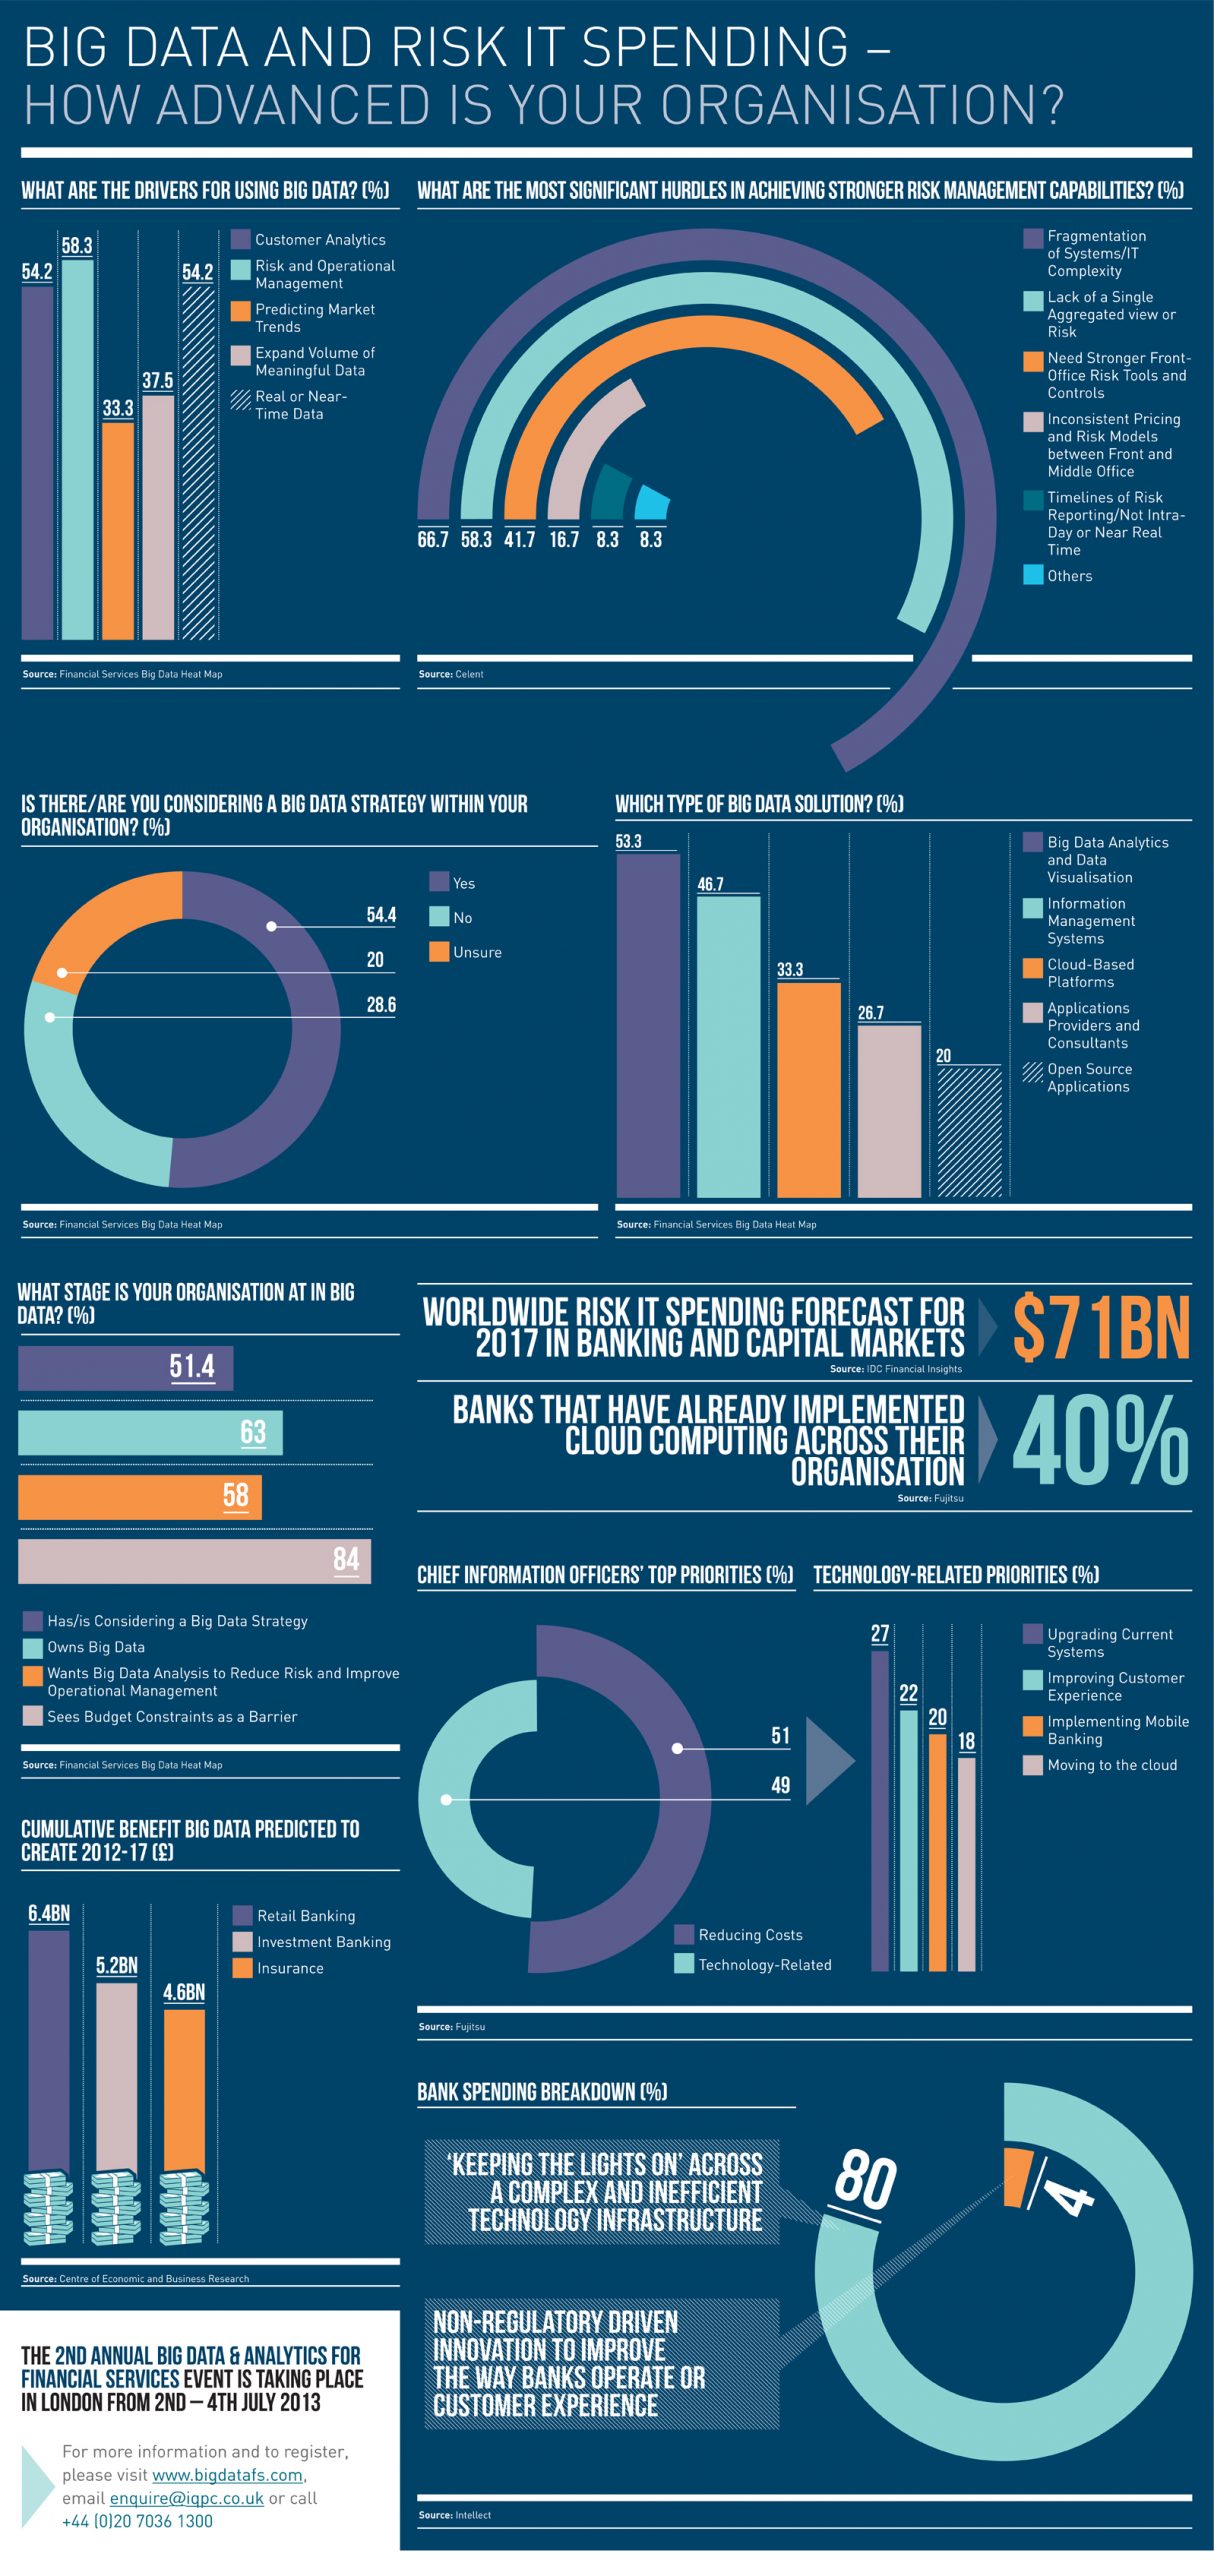 Financial Services Firms Leveraging Big Data - Infographic